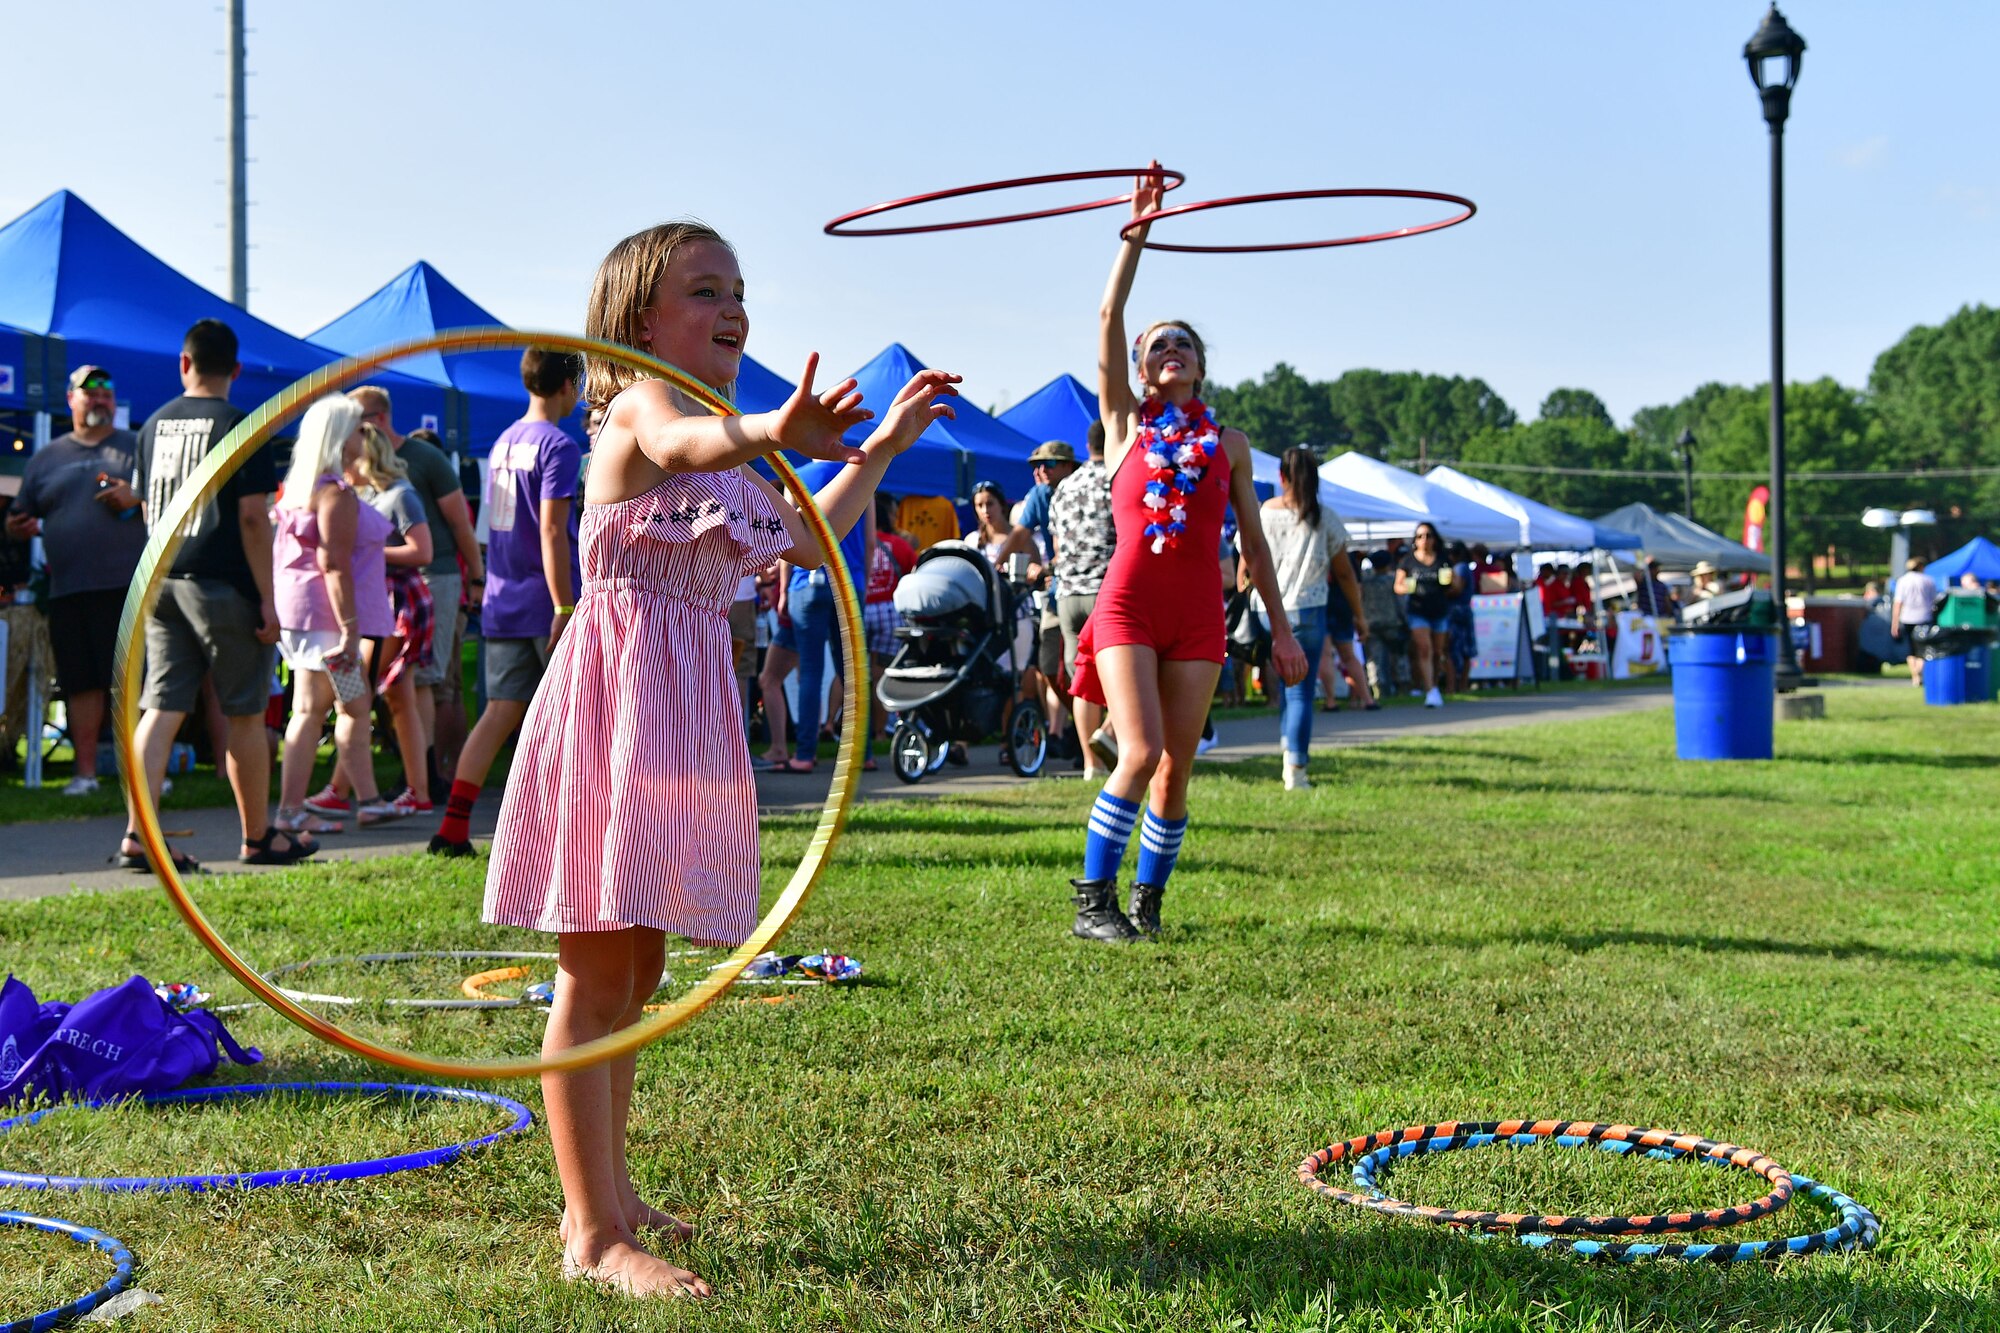 A child twirls a hula hoop during the liberty fest